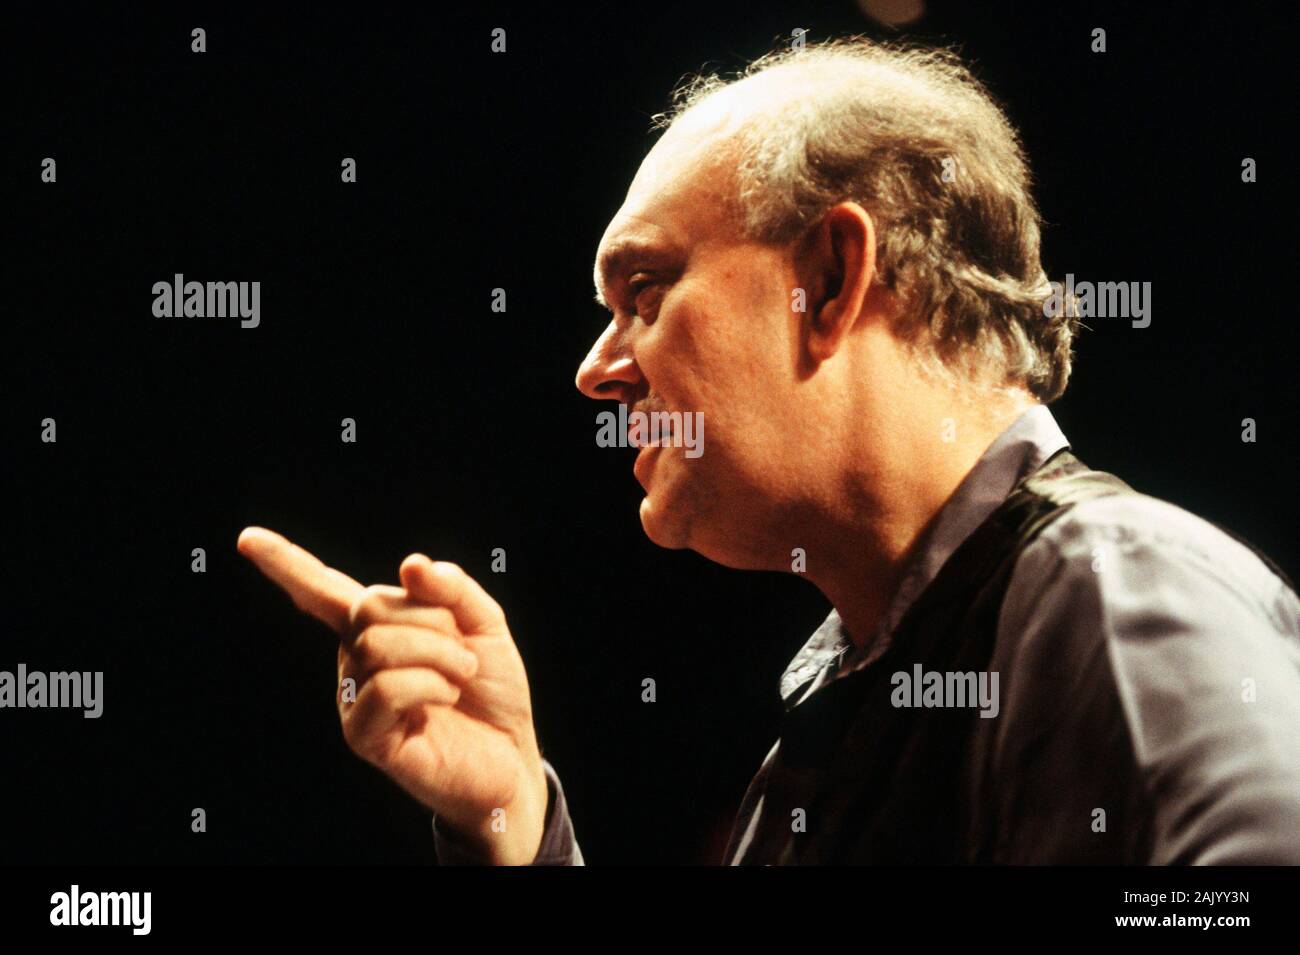 Alan Ayckbourn rehearsing an RSC (Royal Shakespeare Company) production of his play WILDEST DREAMS at The Pit theatre, Barbican Centre, London in December 1993 Stock Photo